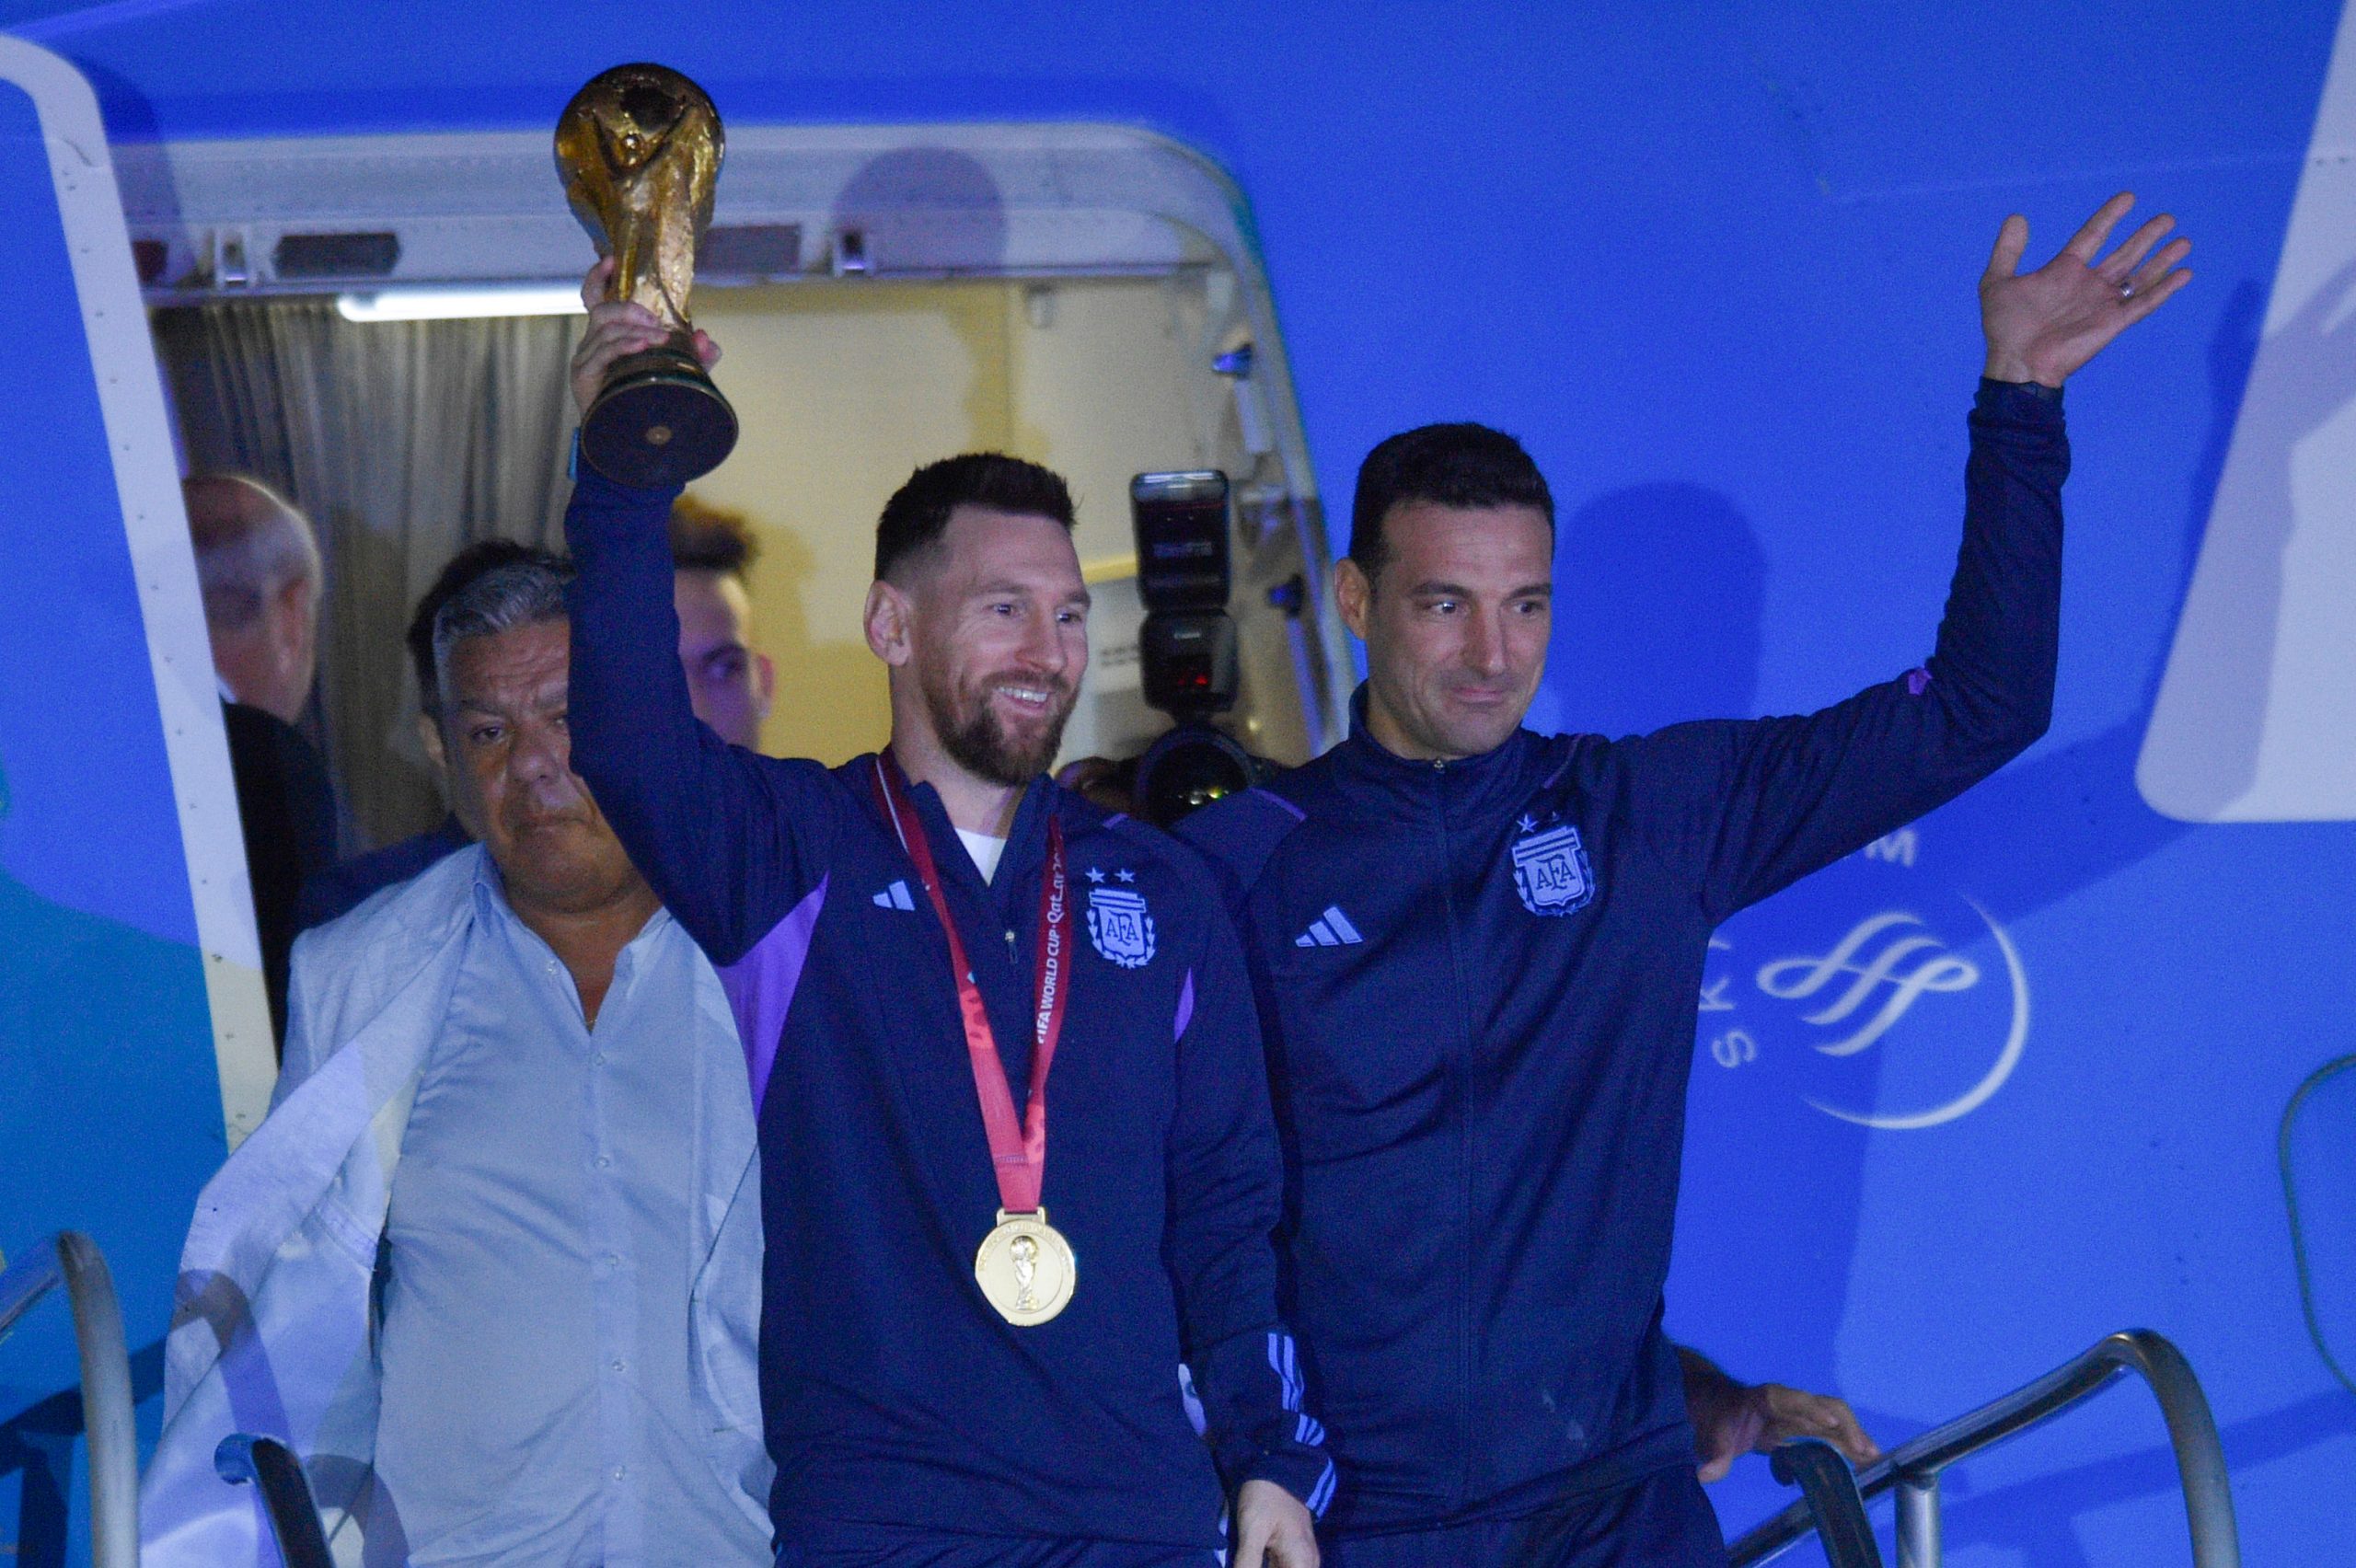 Lionel Messi posts heartfelt message, video after World Cup triumph: ‘Failure is part of the journey’